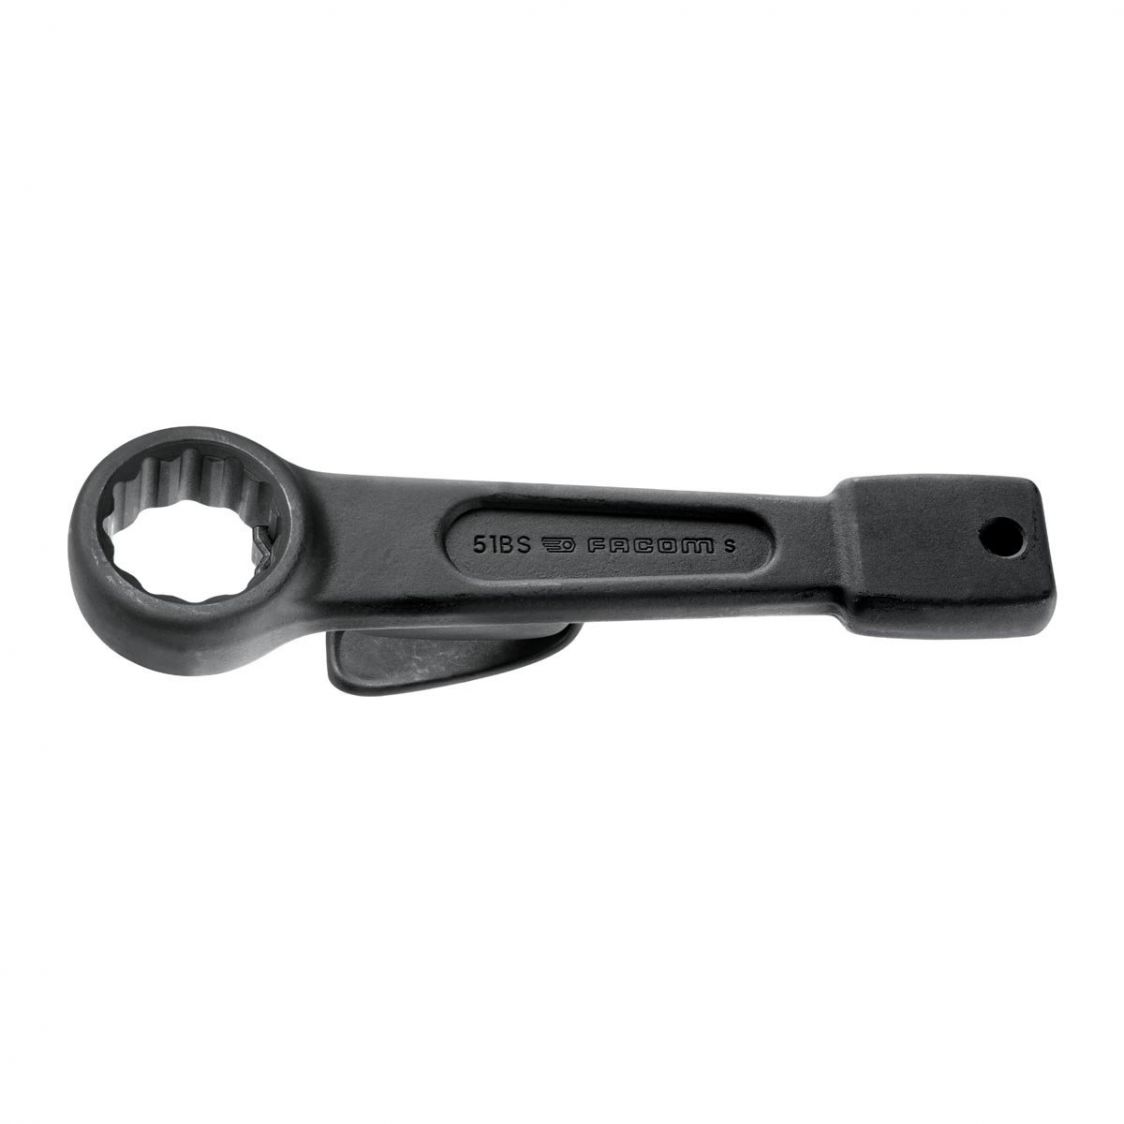 FACOM 51BS.46 - 46mm Metric Safety Impact Slogging Ring Spanner